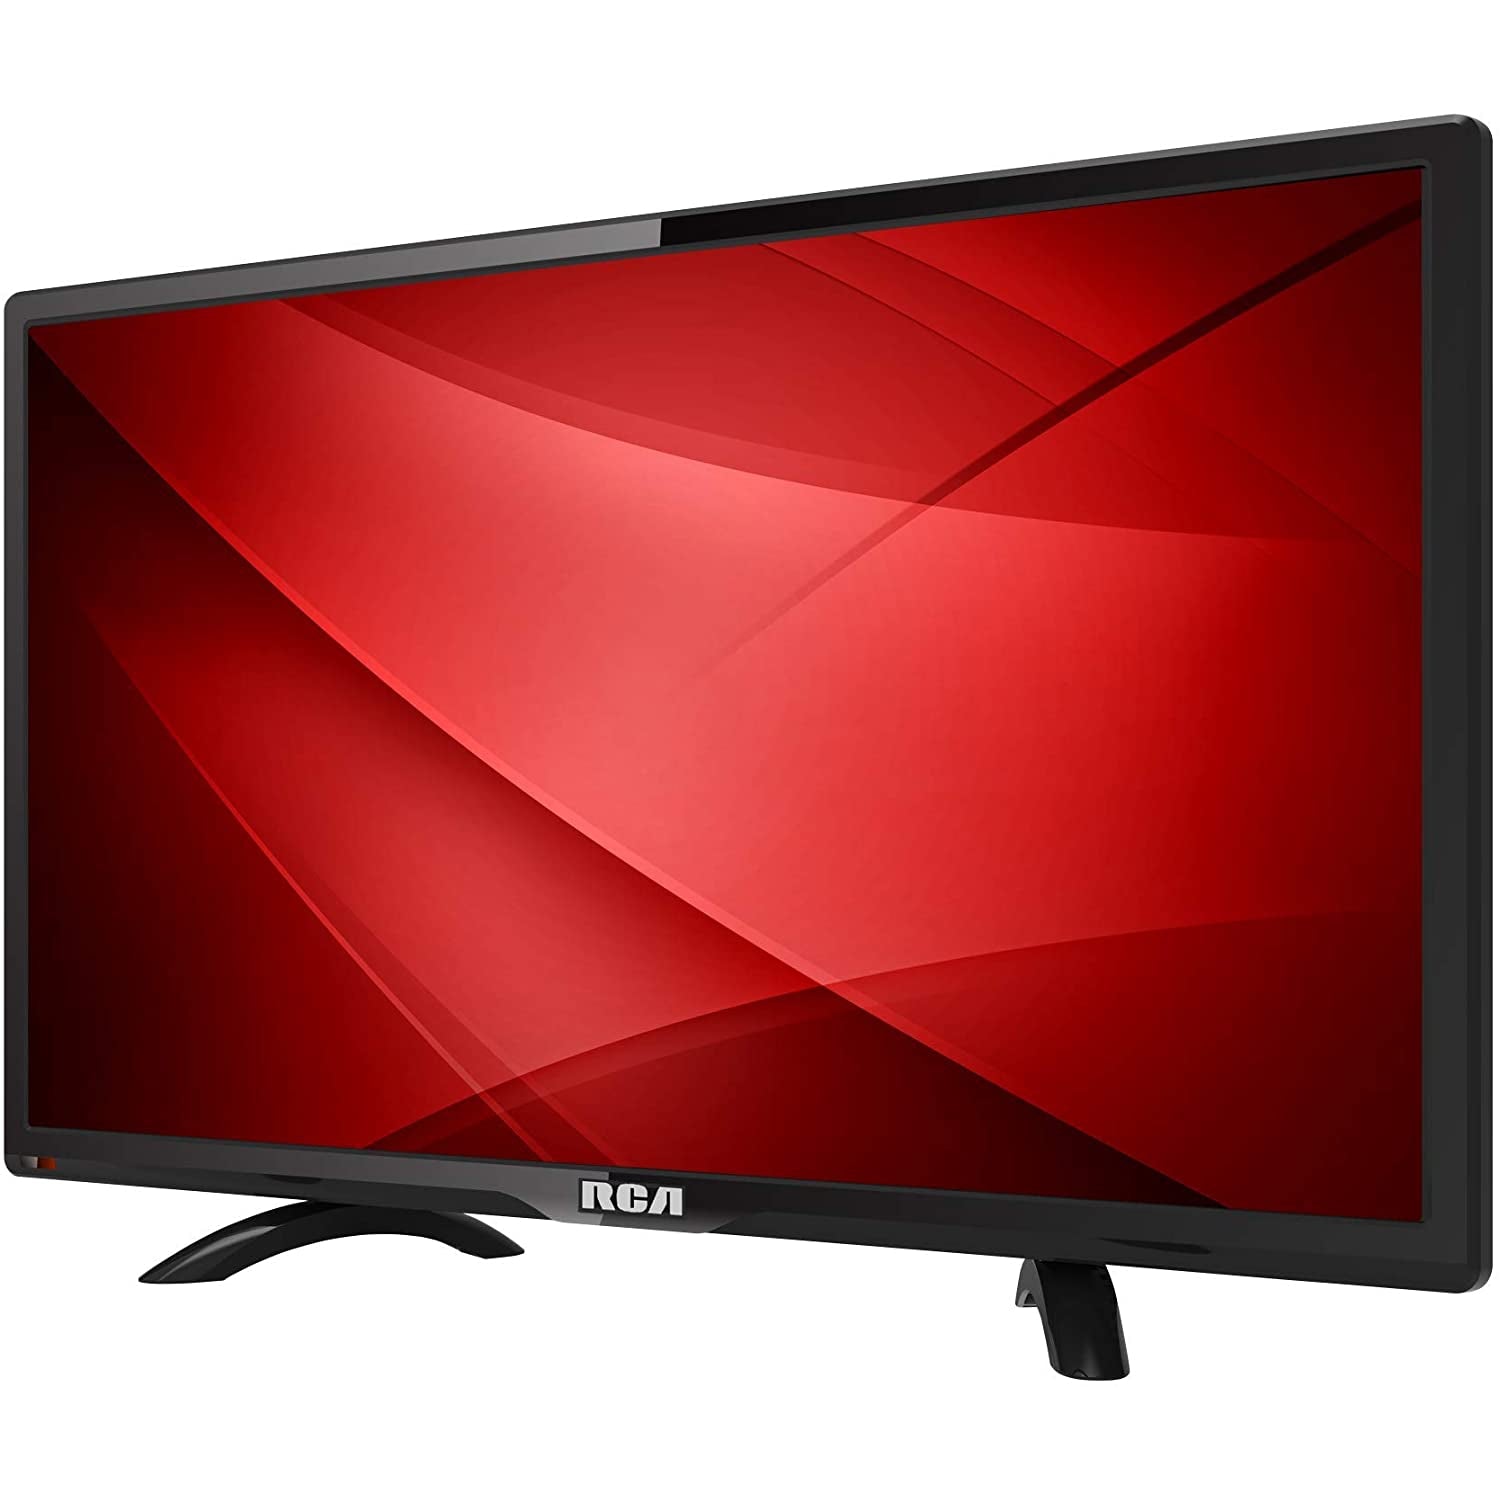 RCA RB24H1-UK 24 inch HD LED TV with HDMI and USB Connection